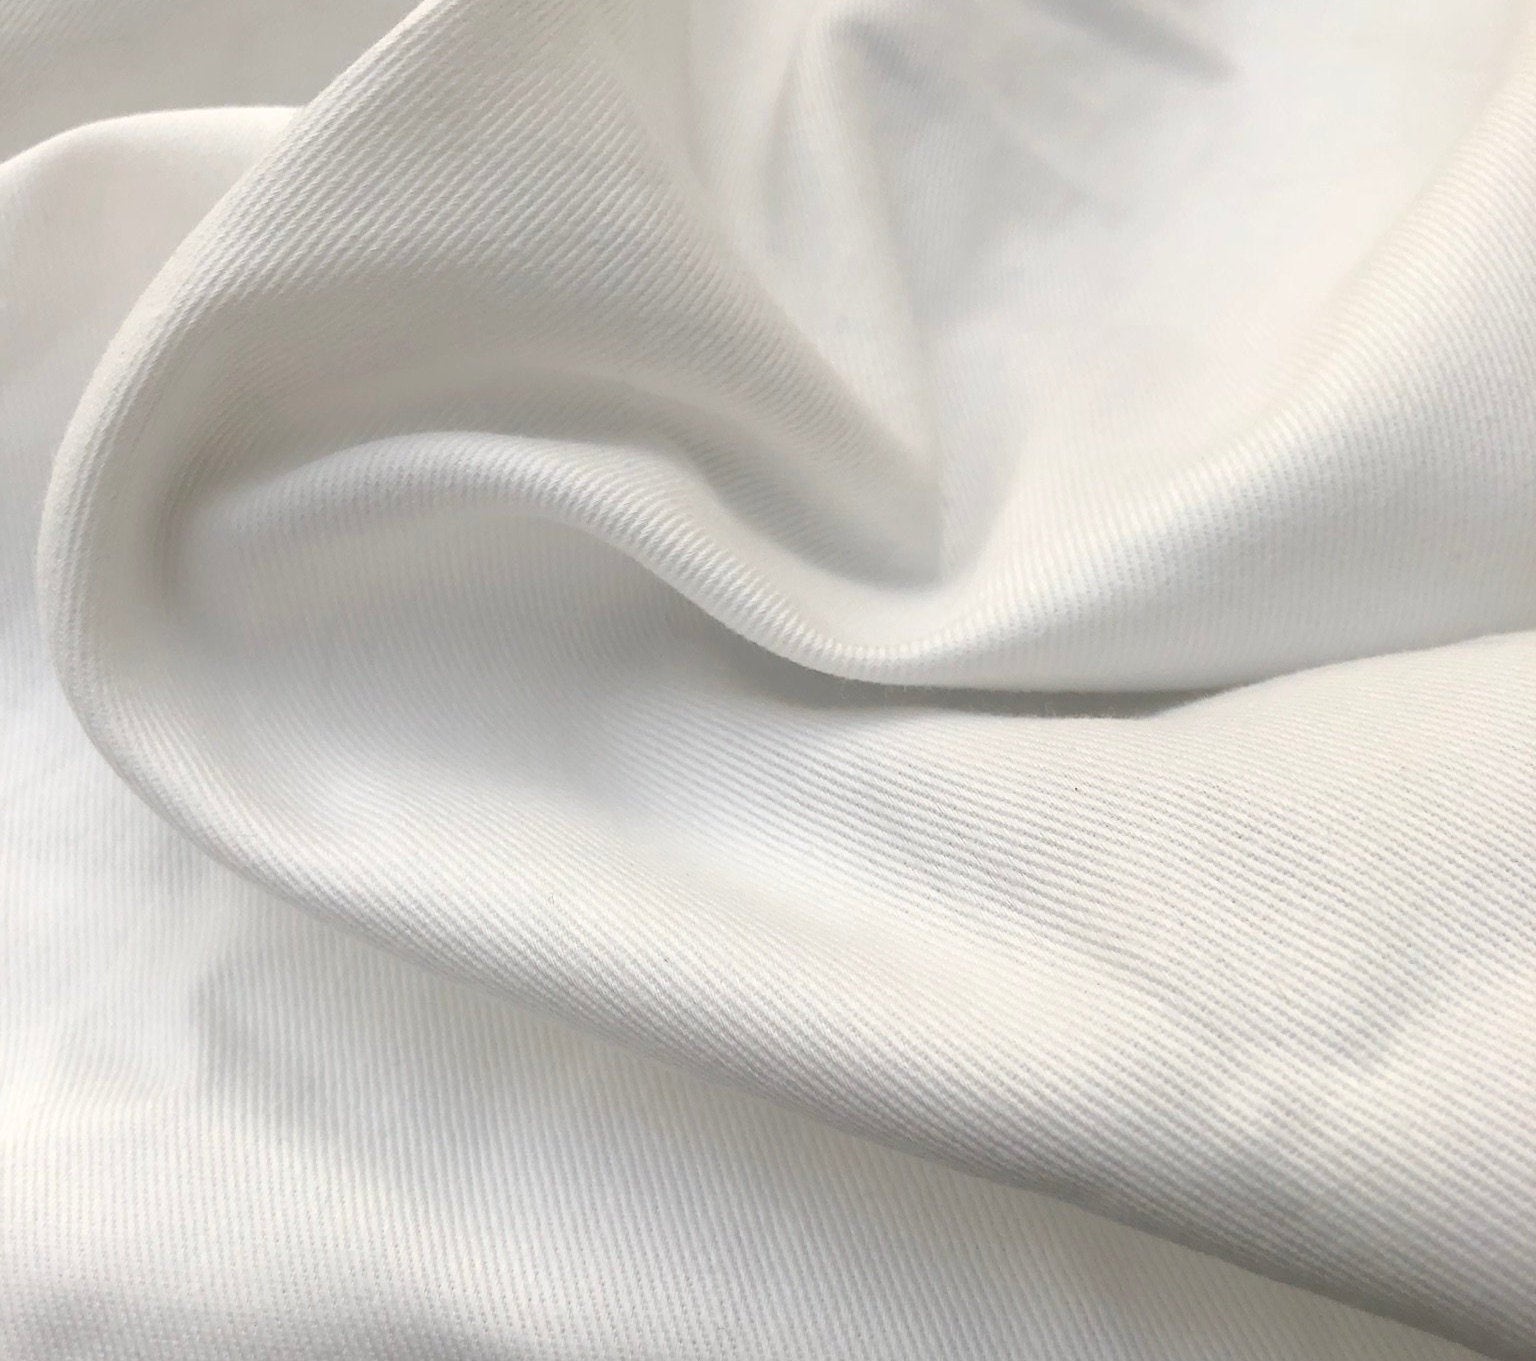 60 100% Organic Cotton Twill 7 OZ White Apparel & Face Mask Woven Fabric  By the Yard